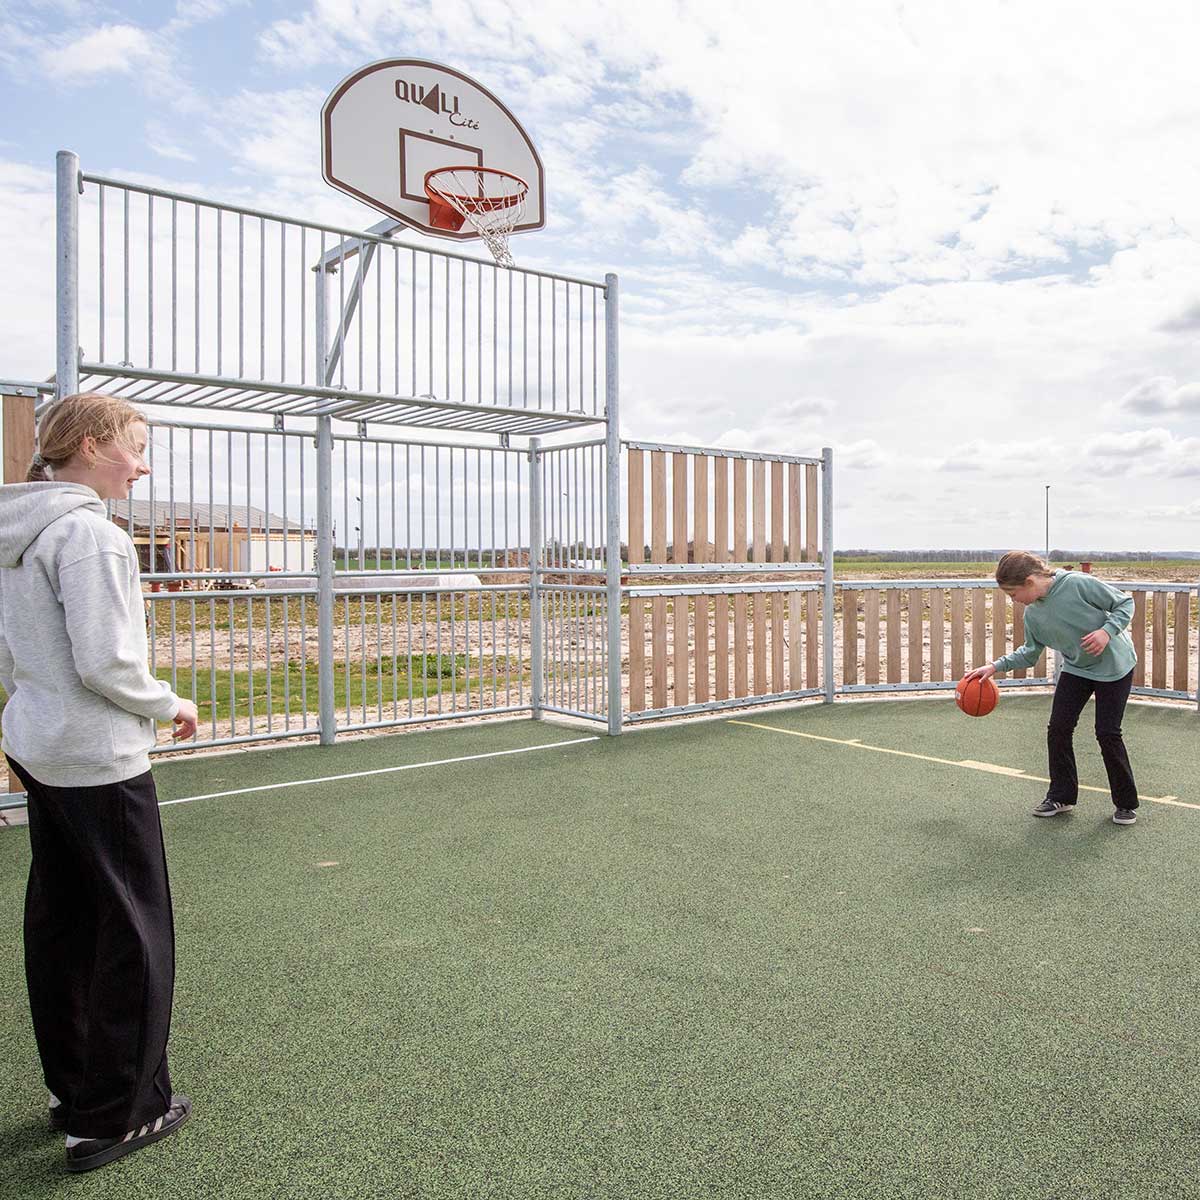 Steel/wood multisports pitch for soccer and basketball